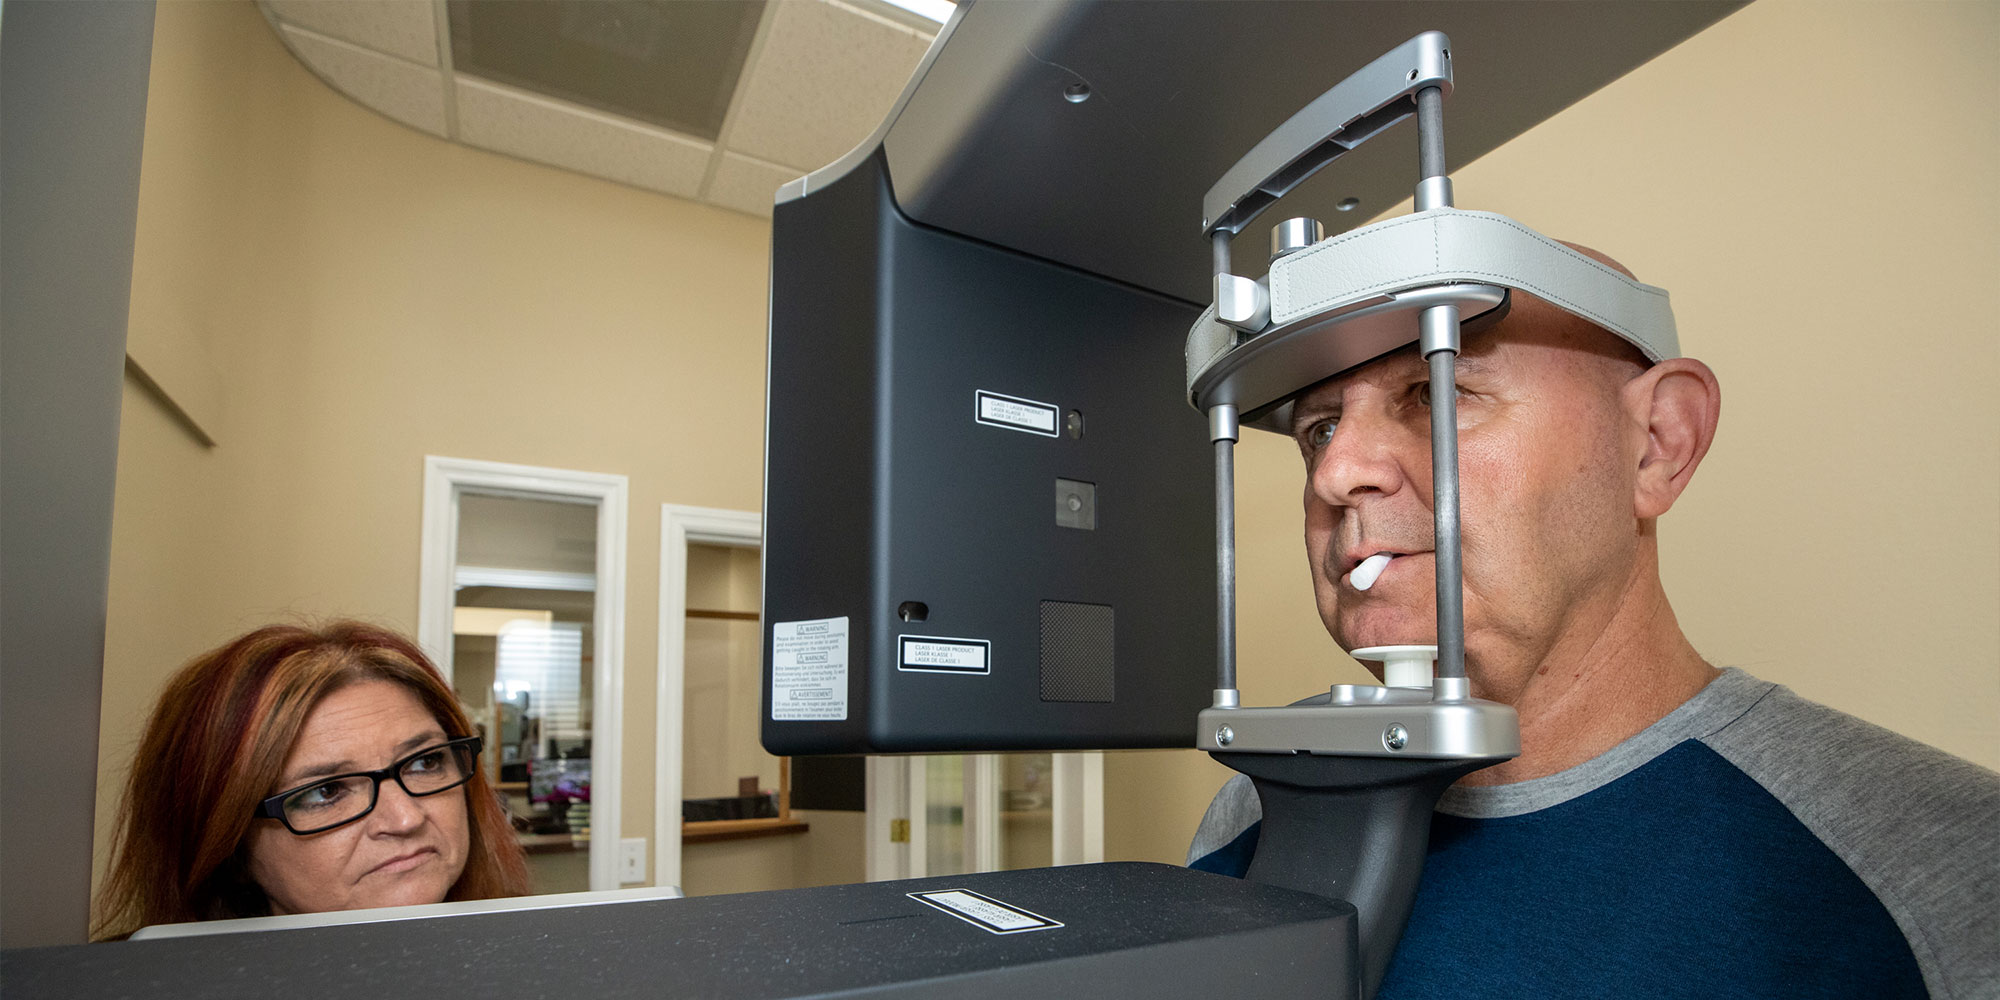 patient undergoing 3D scanning for dental procedure within the dental practice